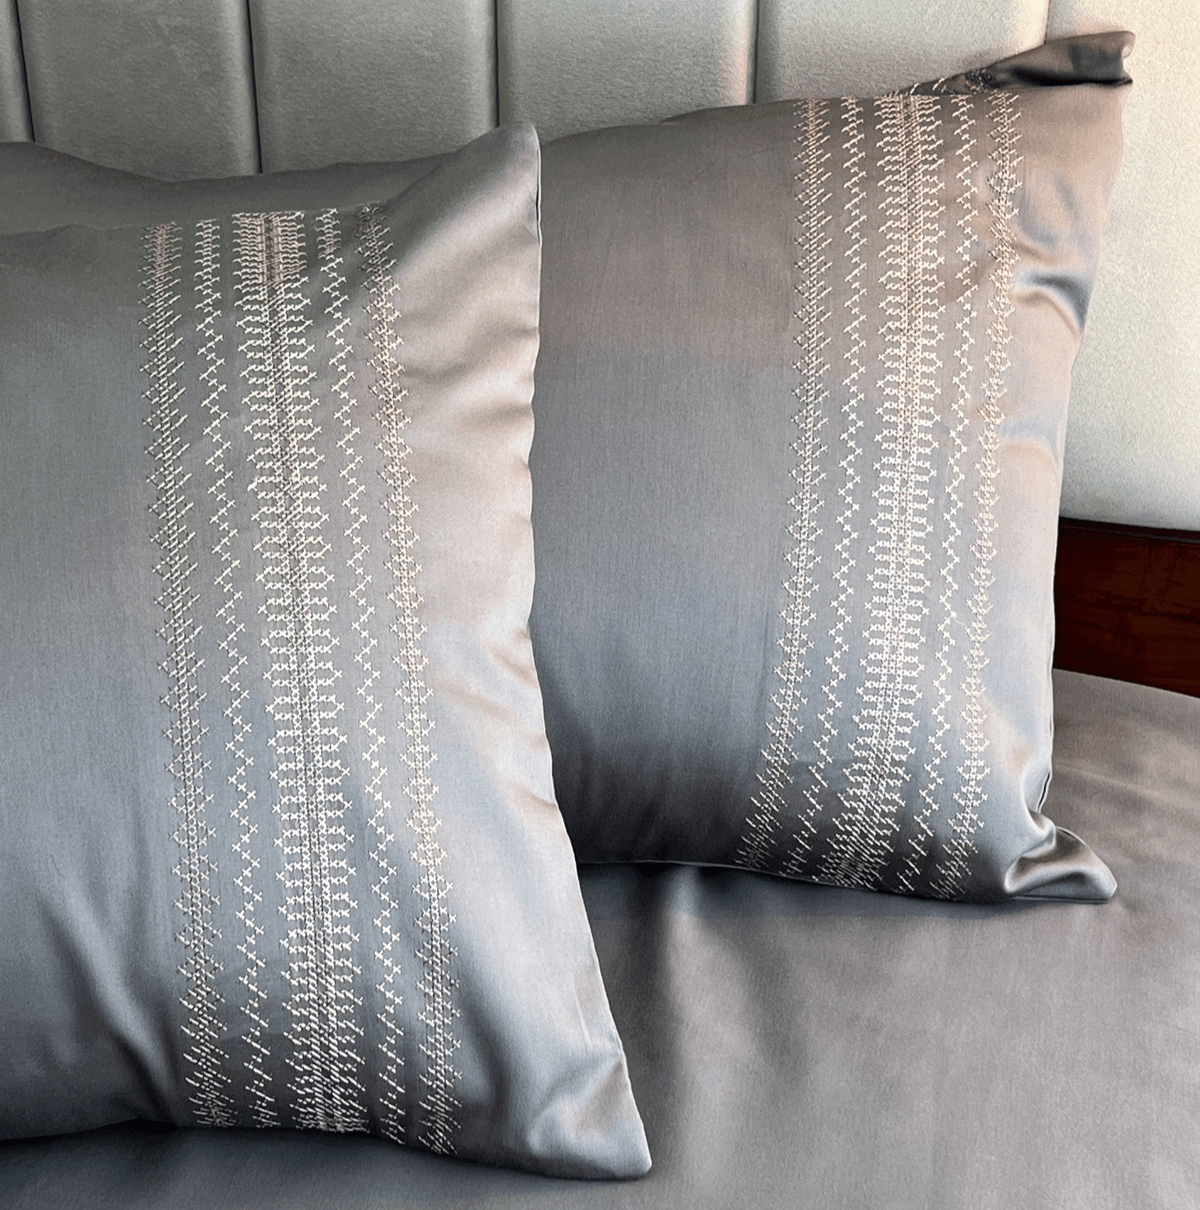 Pristine Elephant Grey Dreams Pillow Covers (Set of 2)